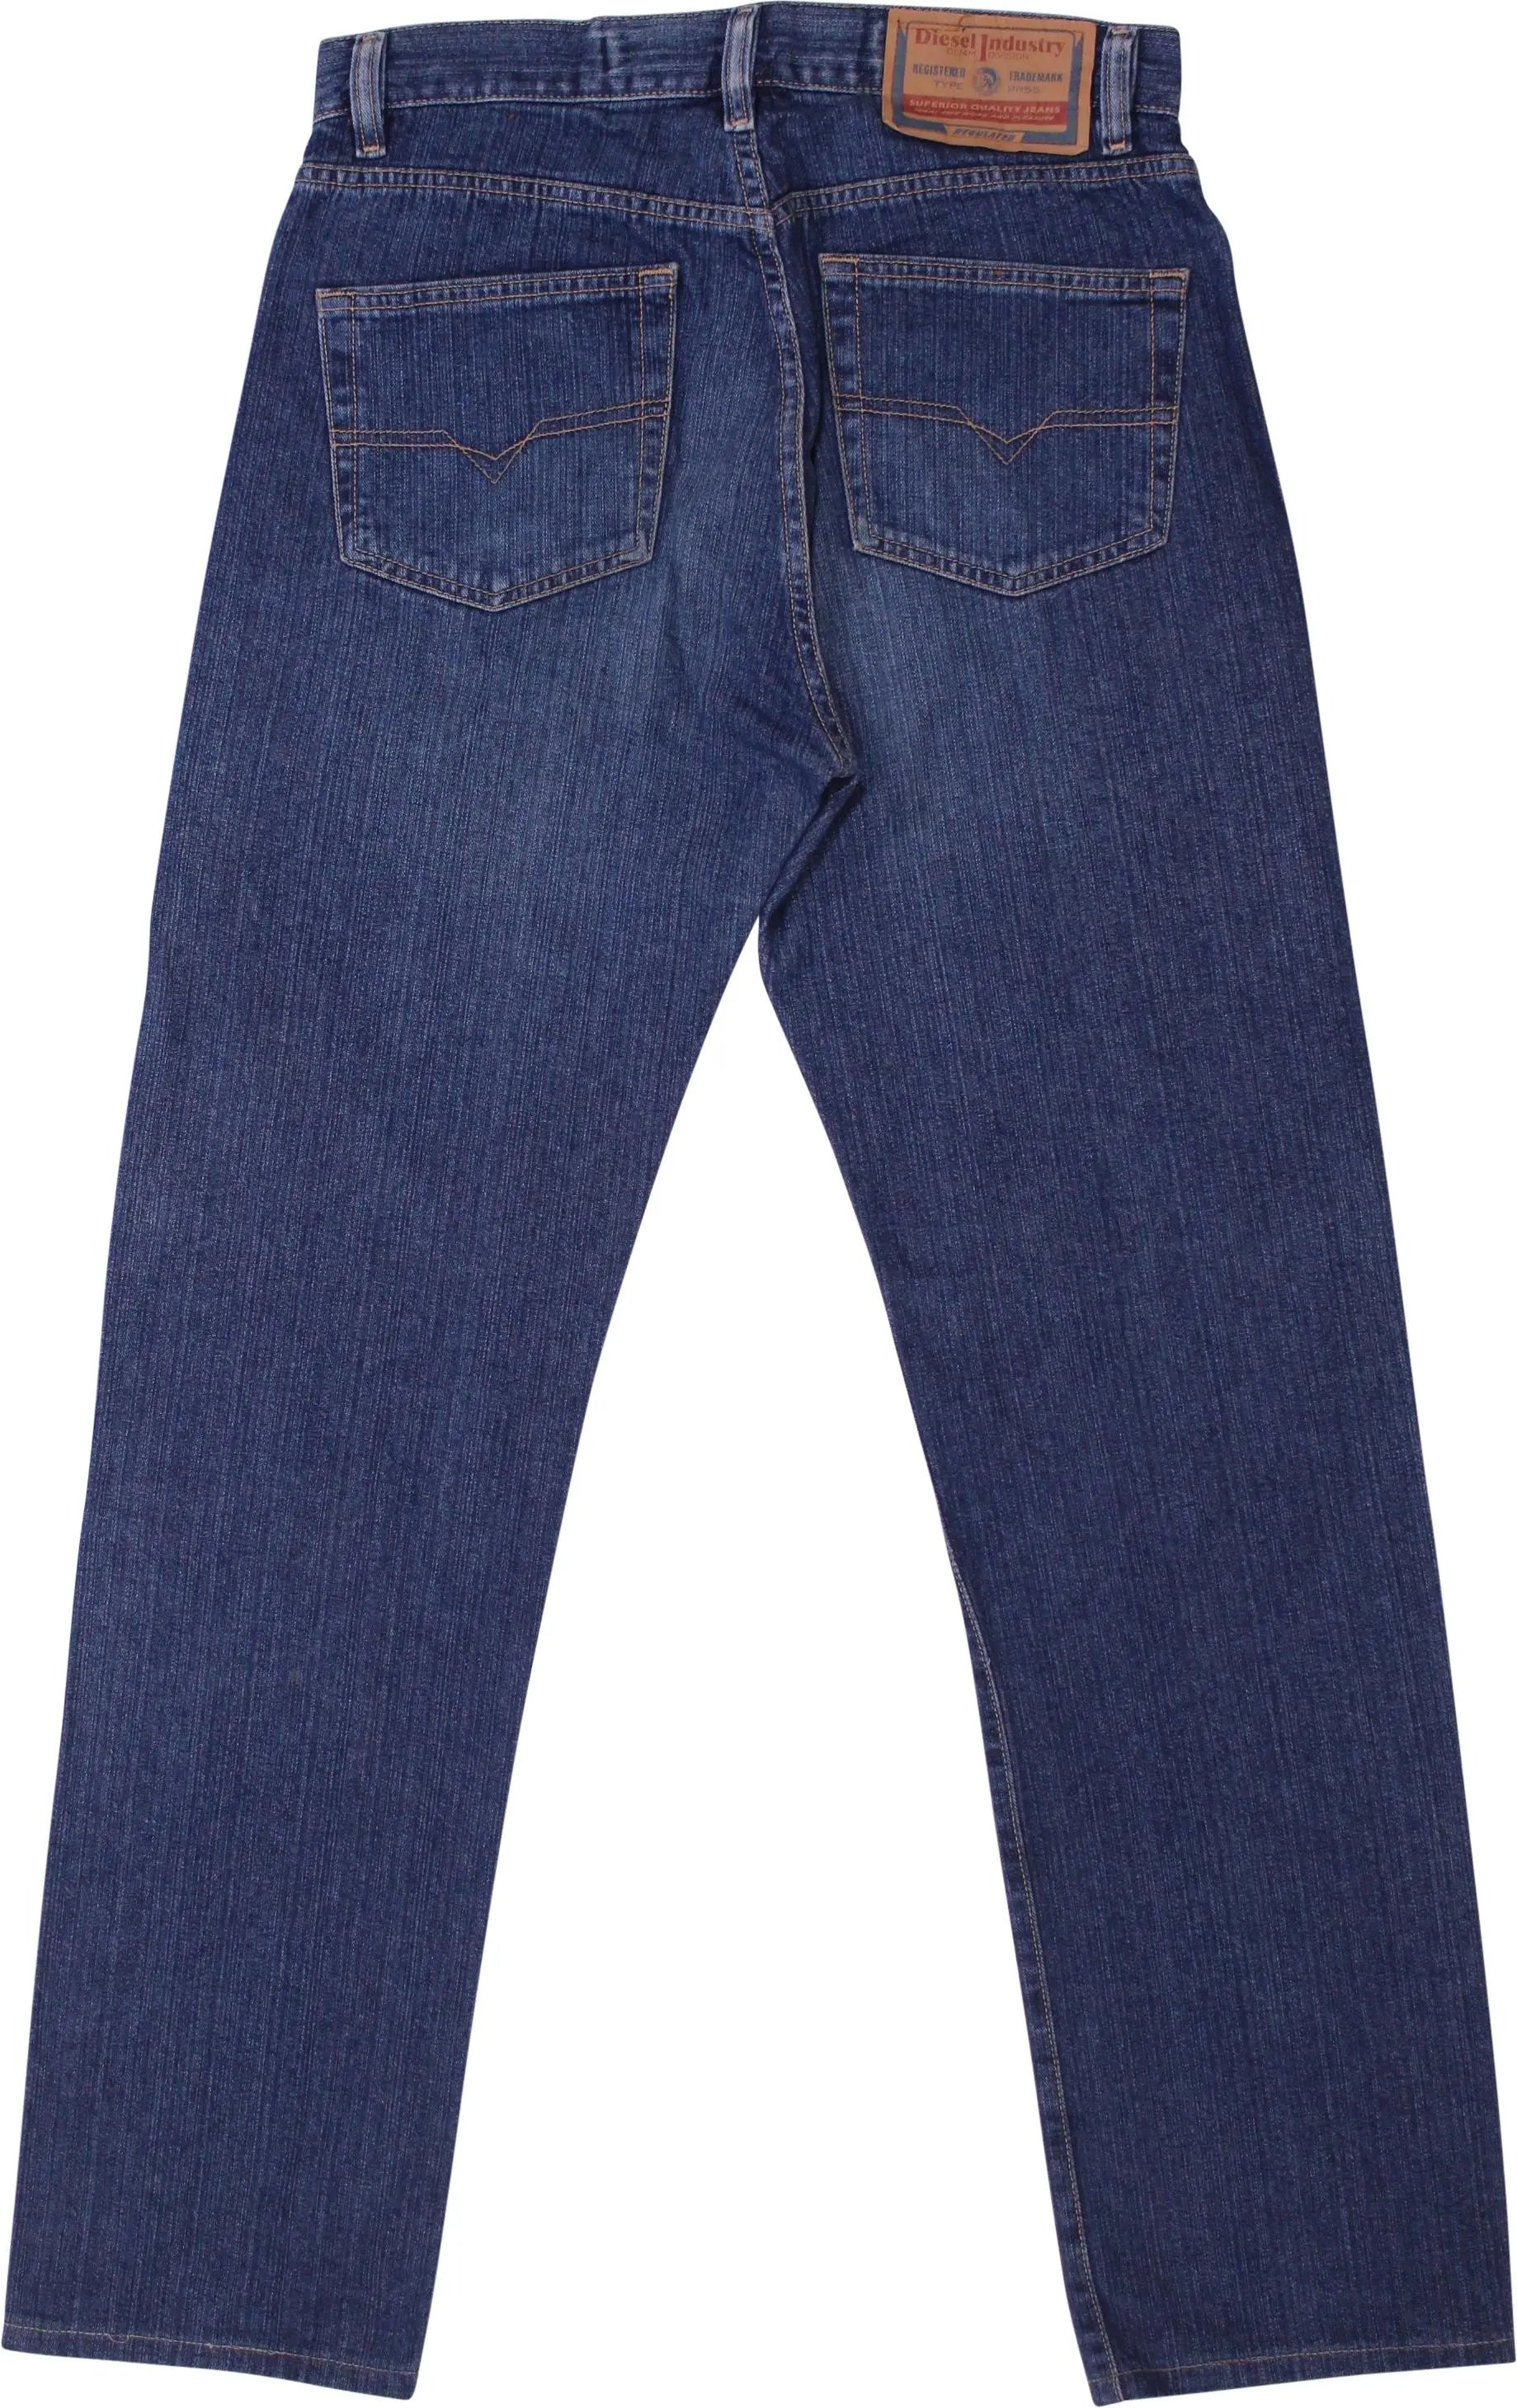 Diesel - Regular Fit Jeans by Diesel- ThriftTale.com - Vintage and second handclothing